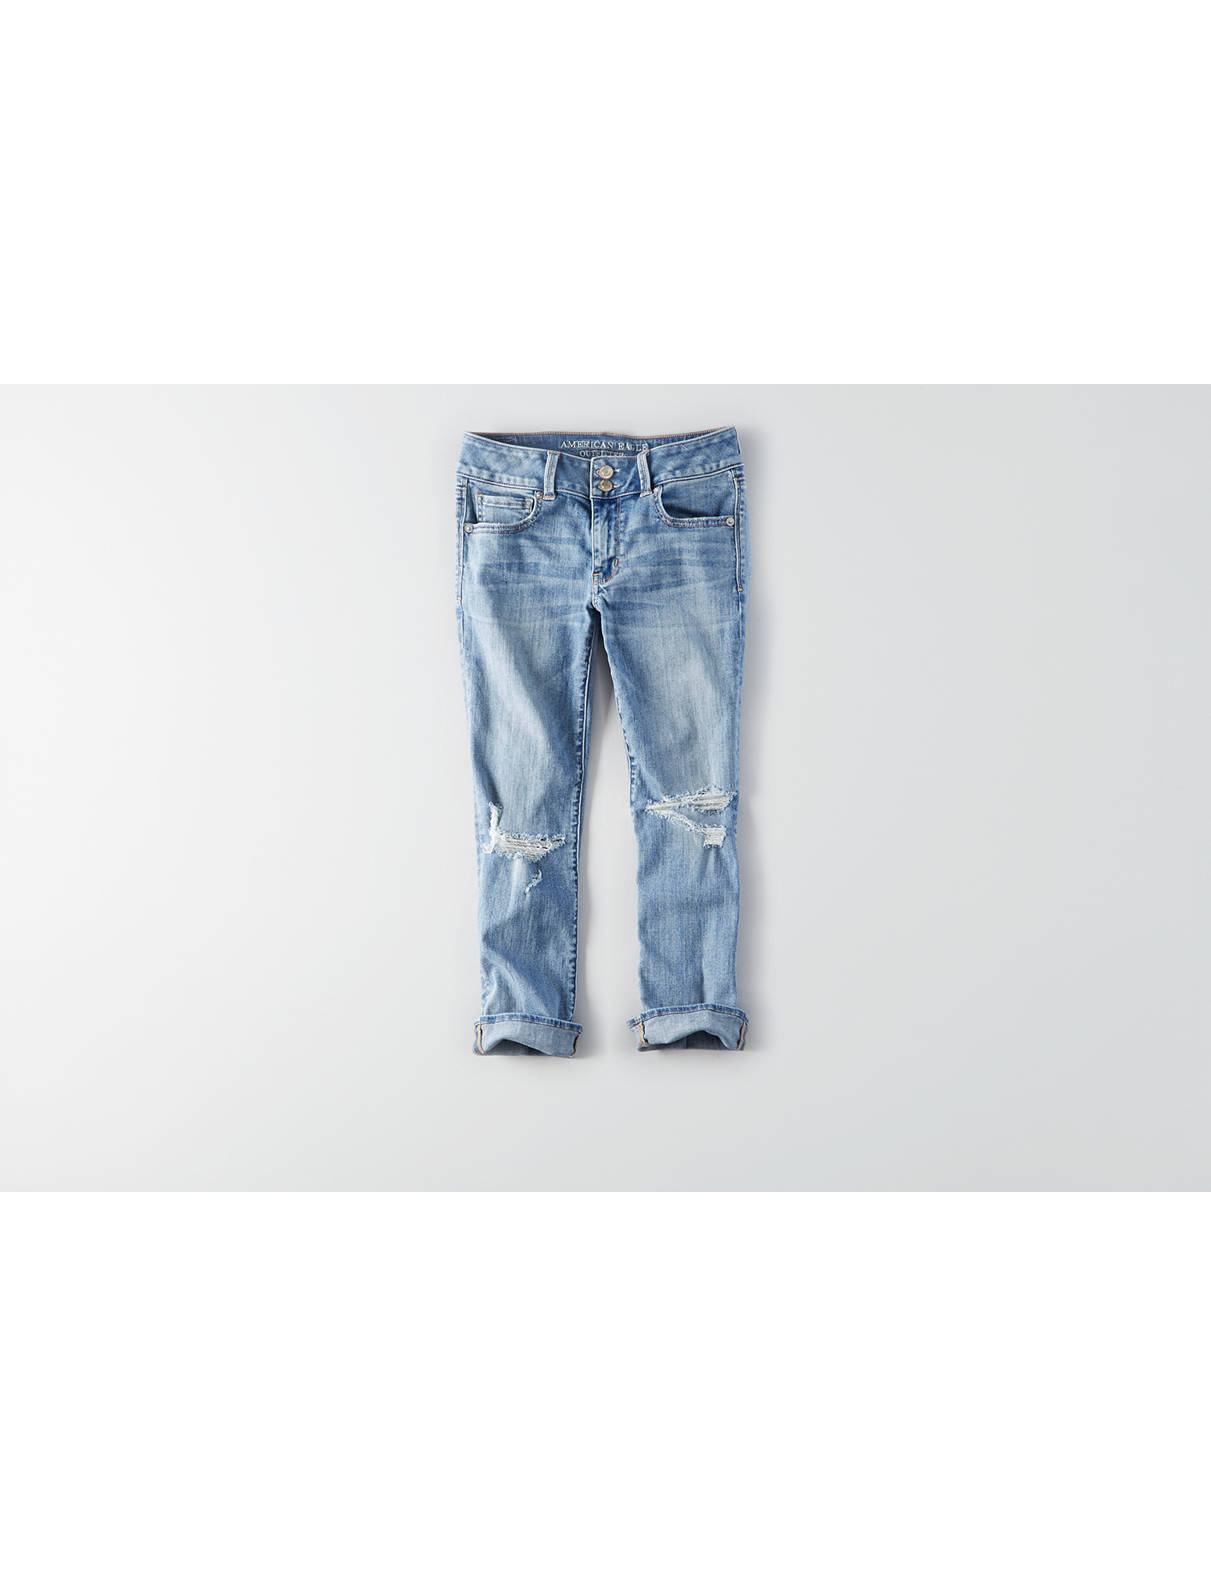 Jeans for Women | American Eagle Outfitters